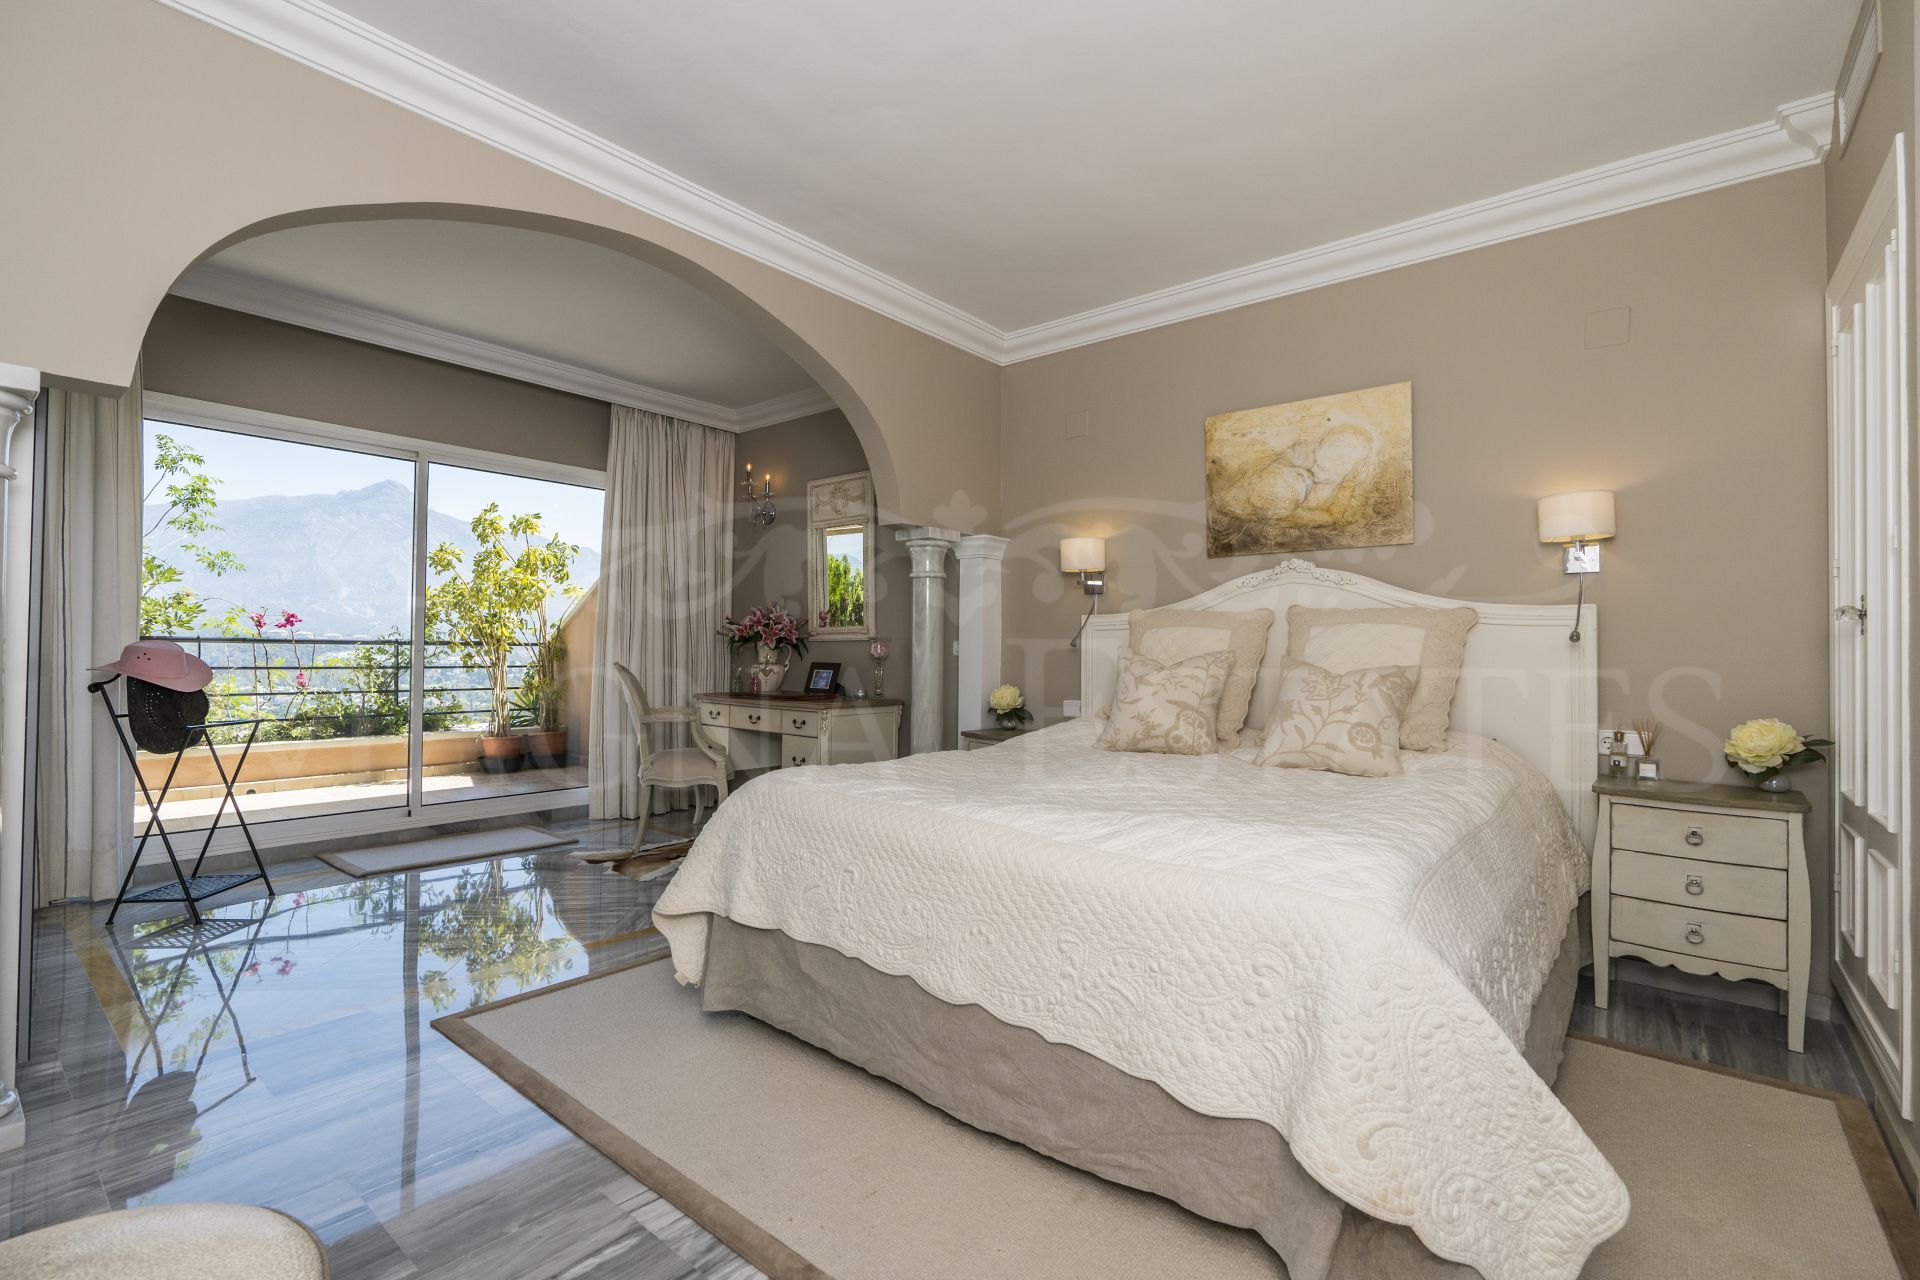 Fully renovated duplex penthouse with beautiful views in Magna Marbella